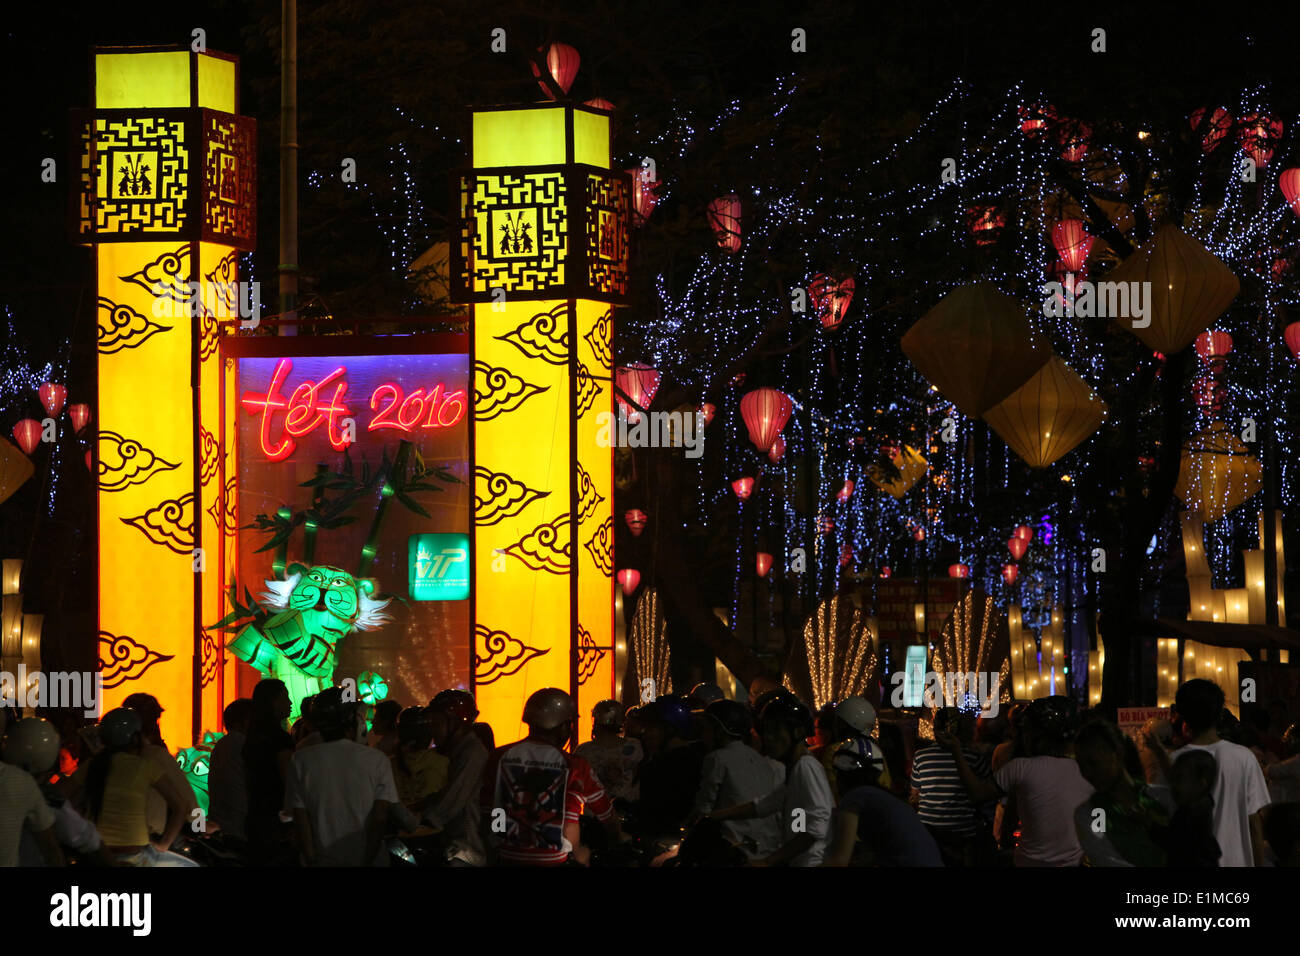 Tt is the Vietnamese New Year based on the Lunar calendar. It is the most important holiday in Vietnam. Stock Photo